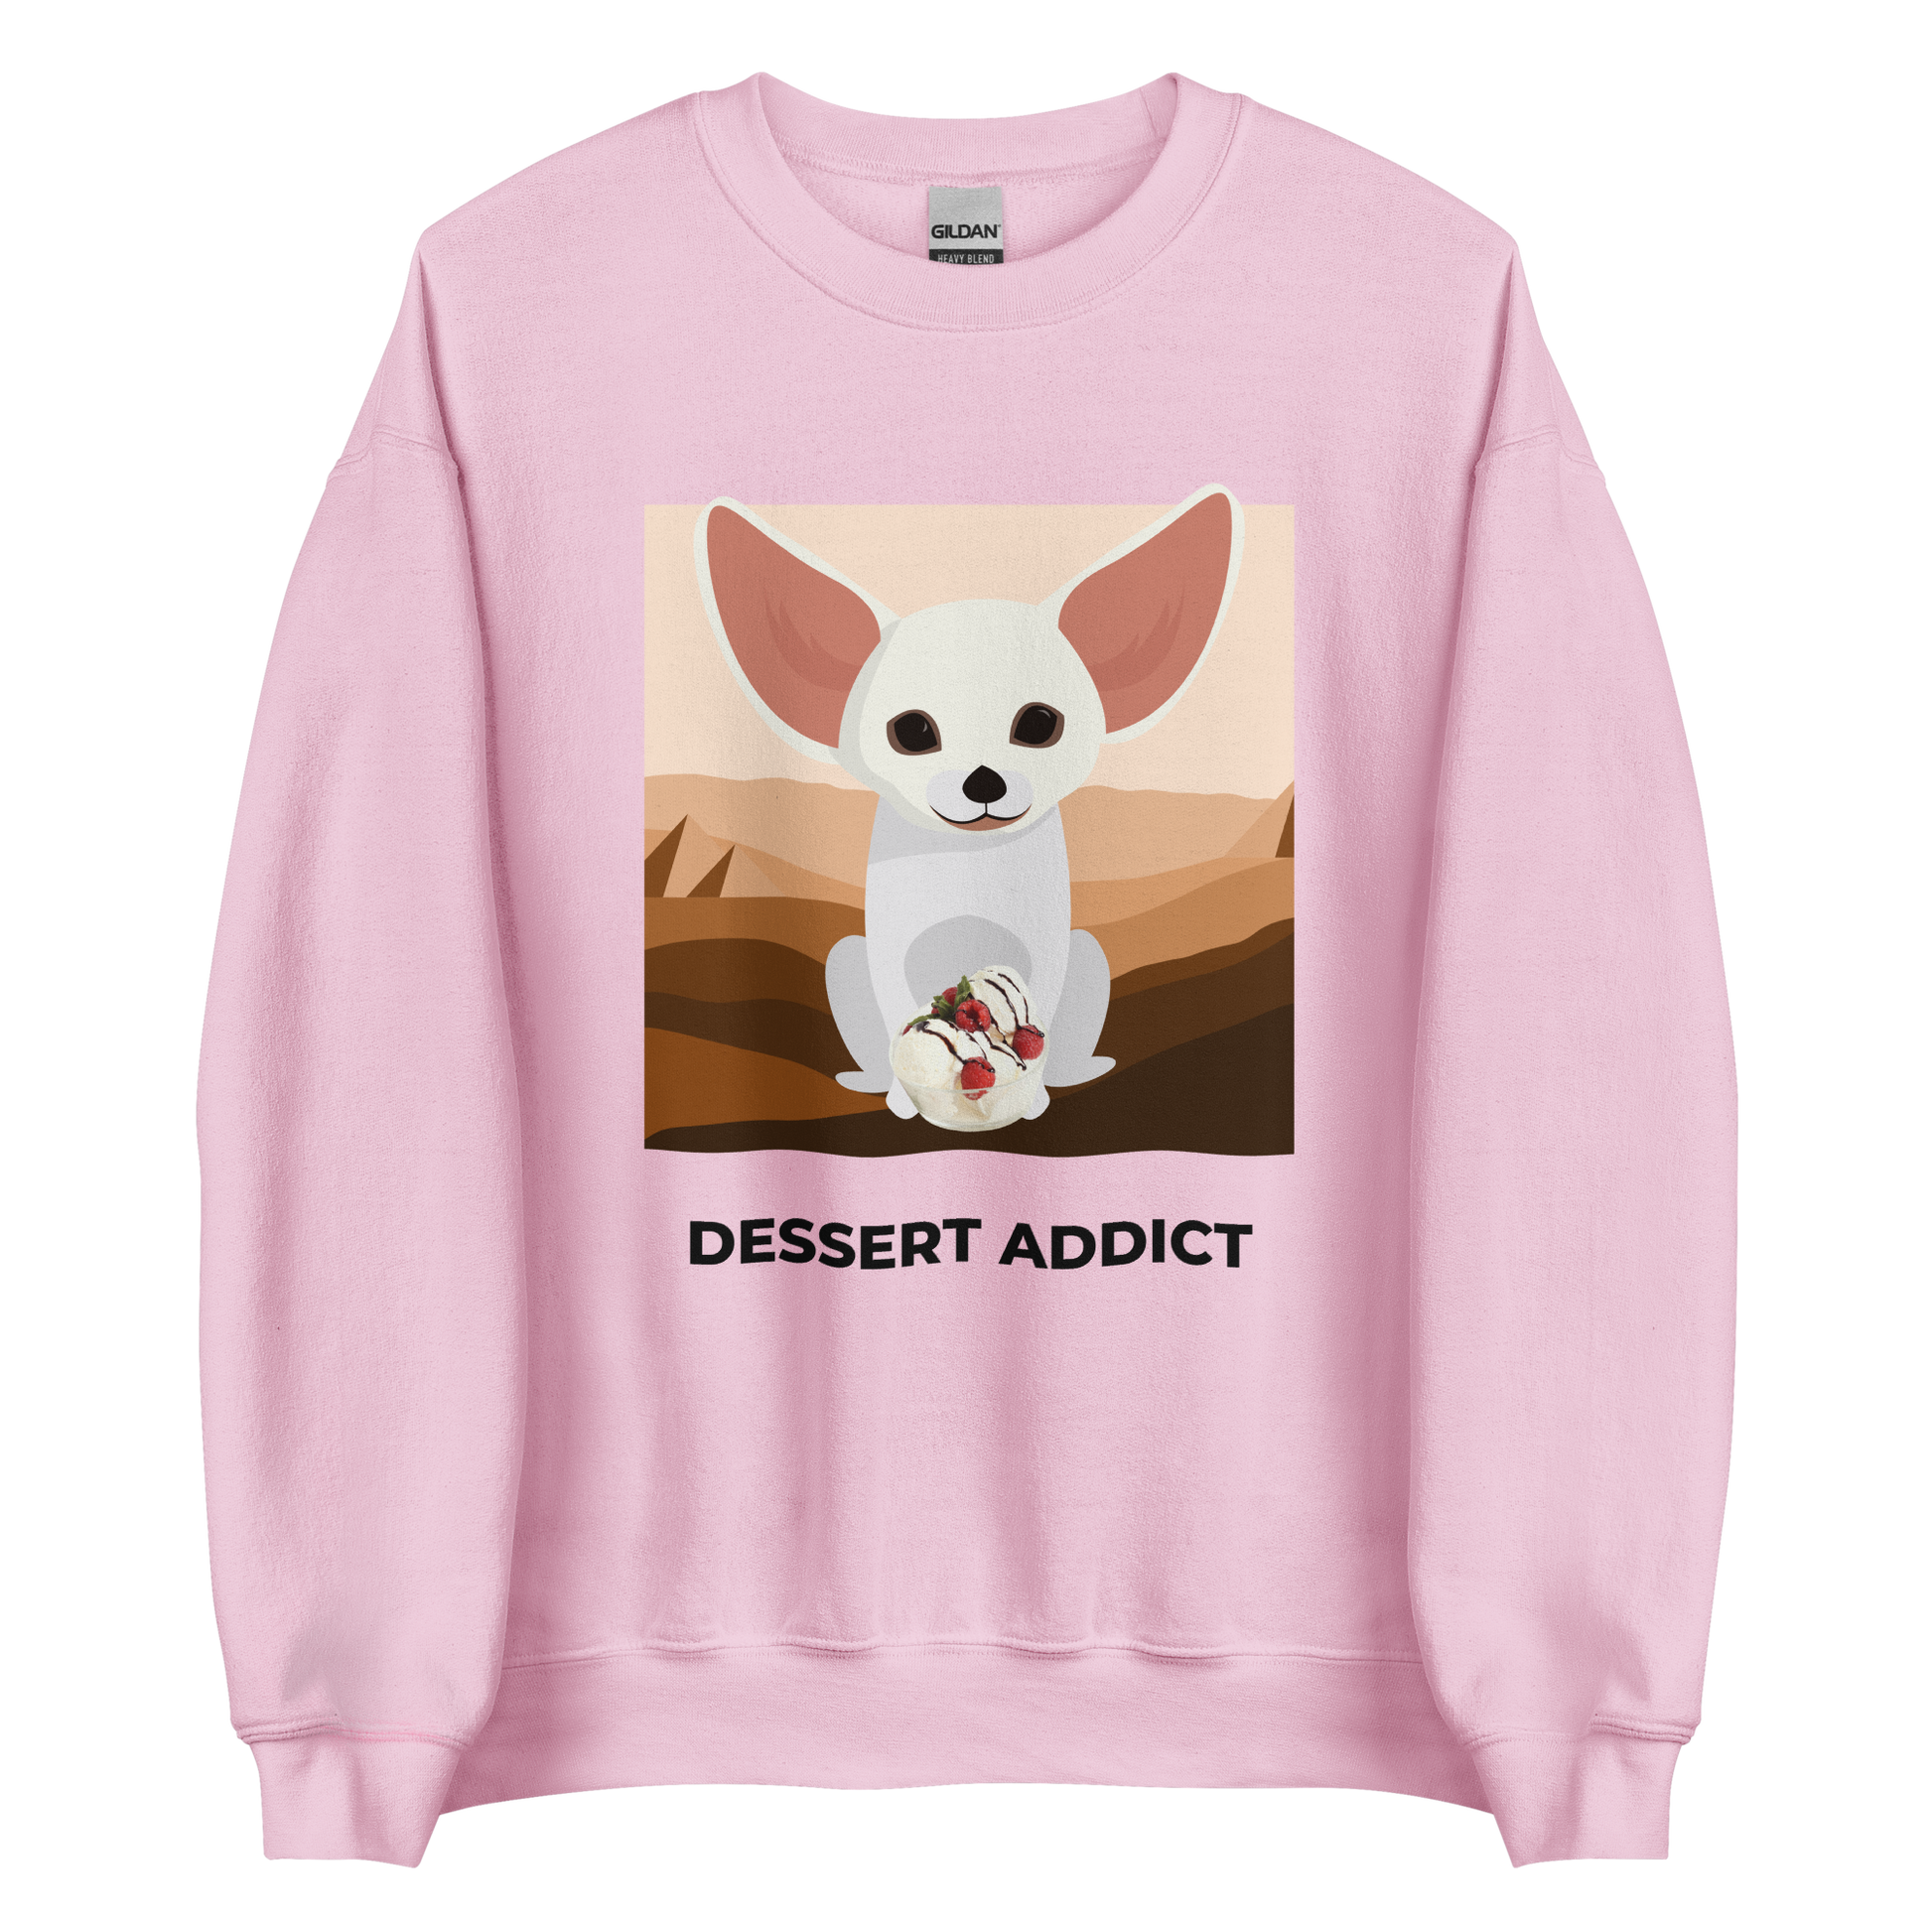 Light Pink Fennec Fox Sweatshirt featuring a cute Dessert Addict graphic on the chest - Funny Graphic Fennec Fox Sweatshirts - Boozy Fox